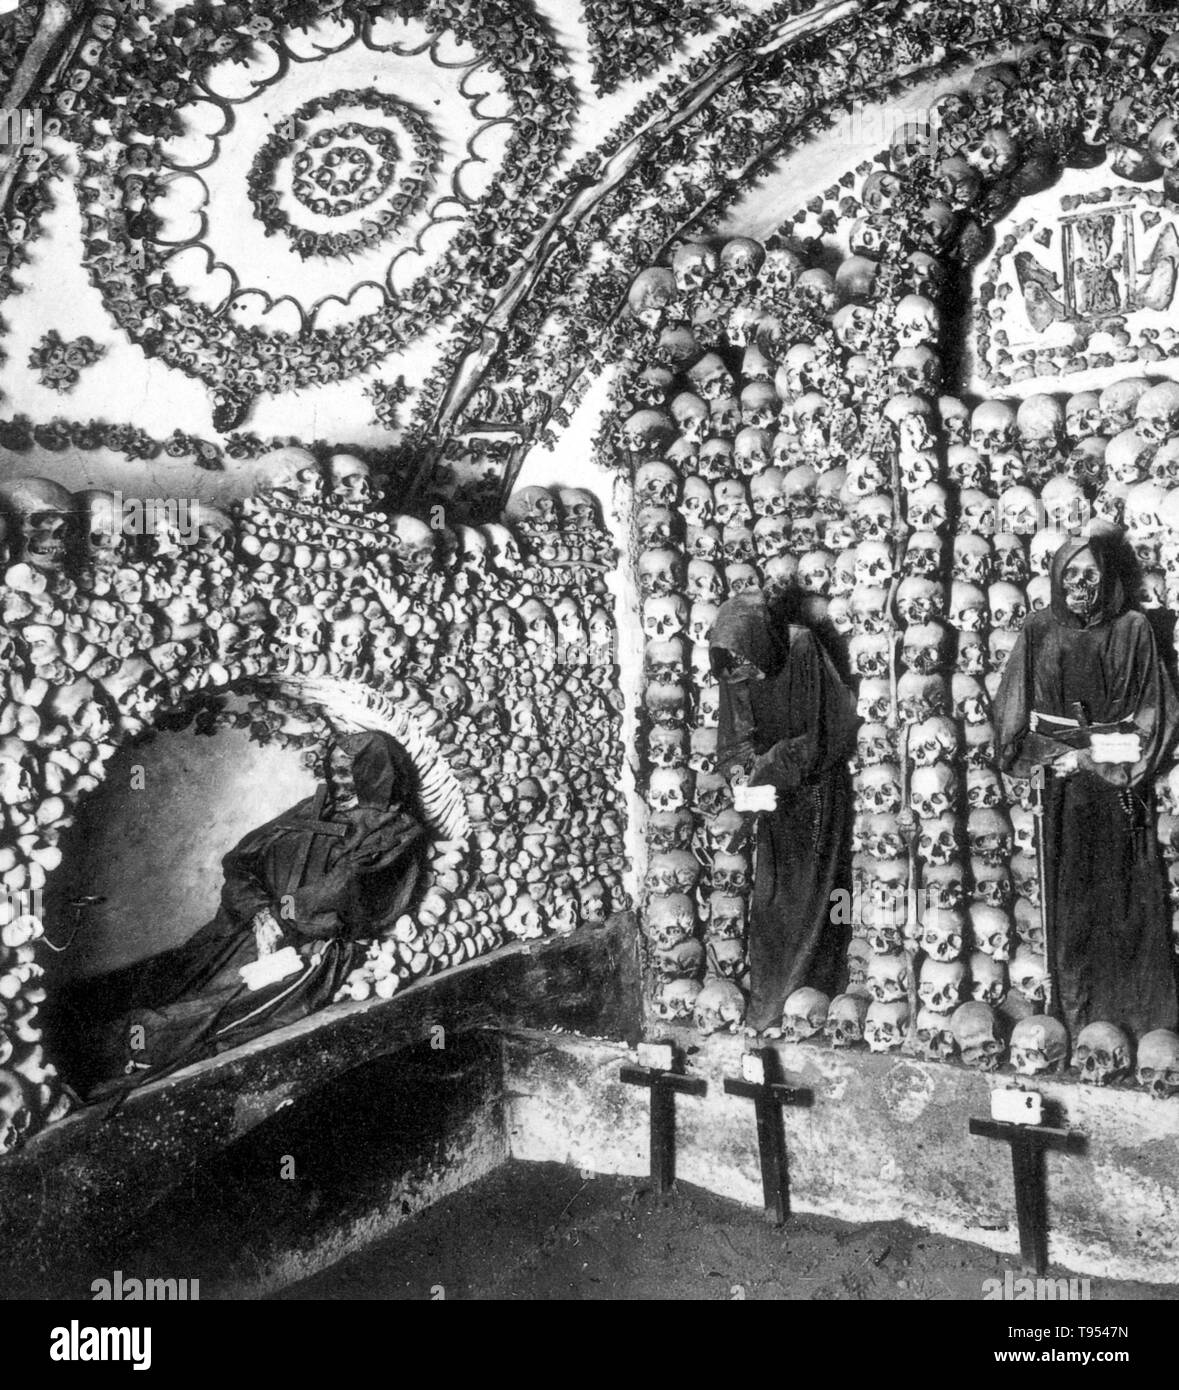 The Capuchin Crypt is a small space comprising several tiny chapels located beneath the church of Santa Maria della Concezione dei Cappuccini on the Via Veneto near Piazza Barberini in Rome, Italy. It contains the skeletal remains of 3,700 bodies believed to be Capuchin friars buried by their order. The Catholic order insists that the display is not meant to be macabre, but a silent reminder of the swift passage of life on Earth and our own mortality. Stock Photo